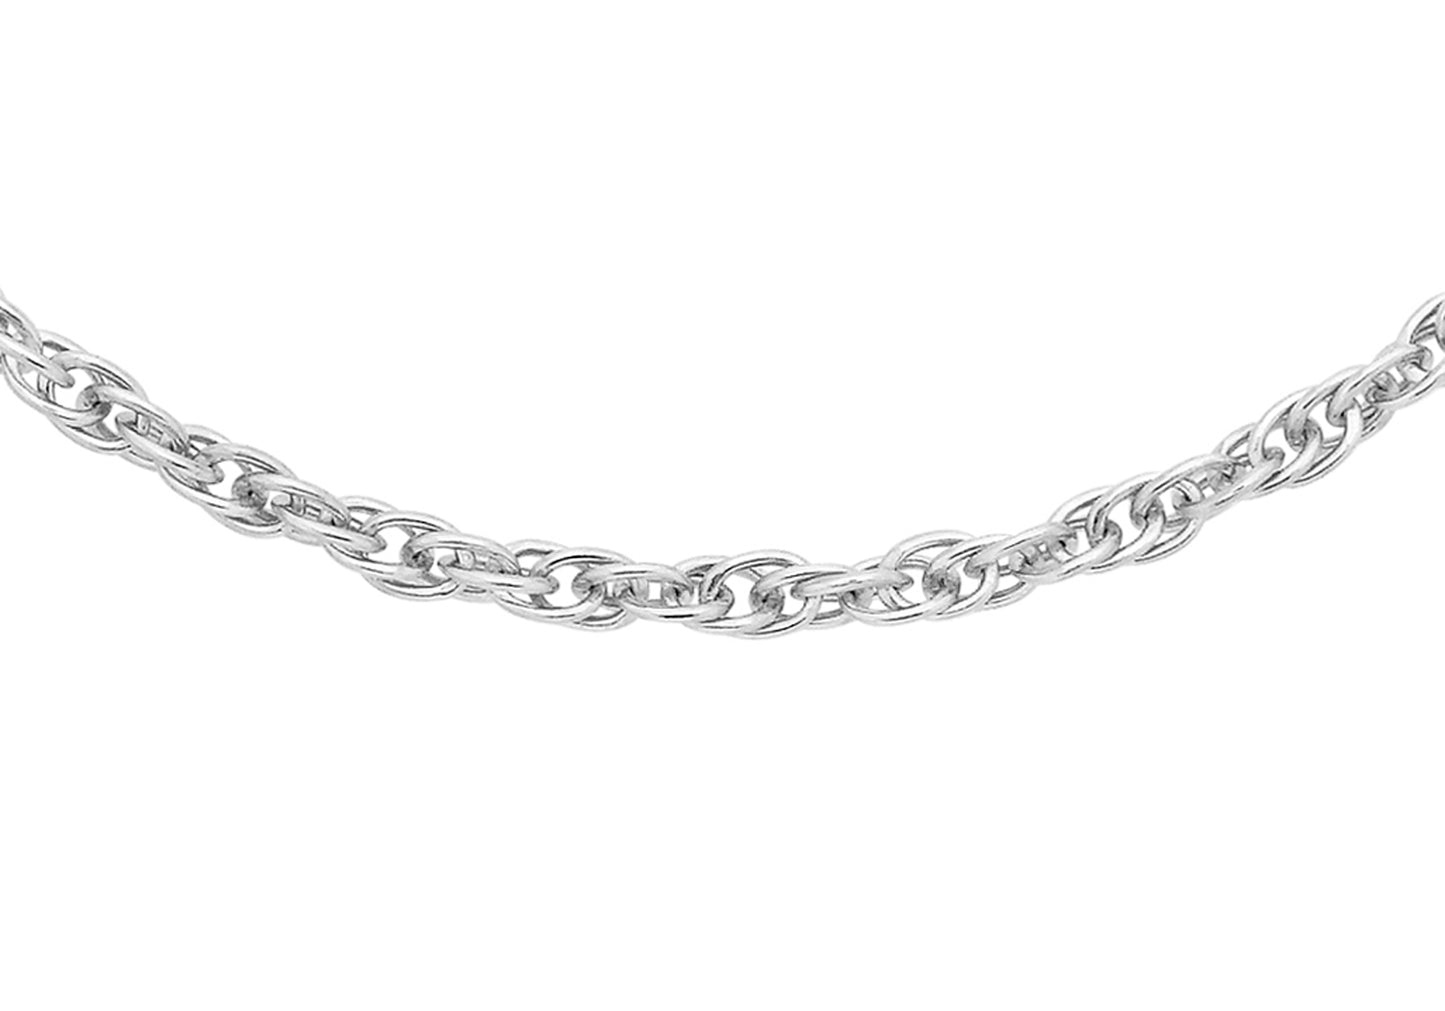 9K White Gold 0.8mm Prince Of Wales Chain 18"